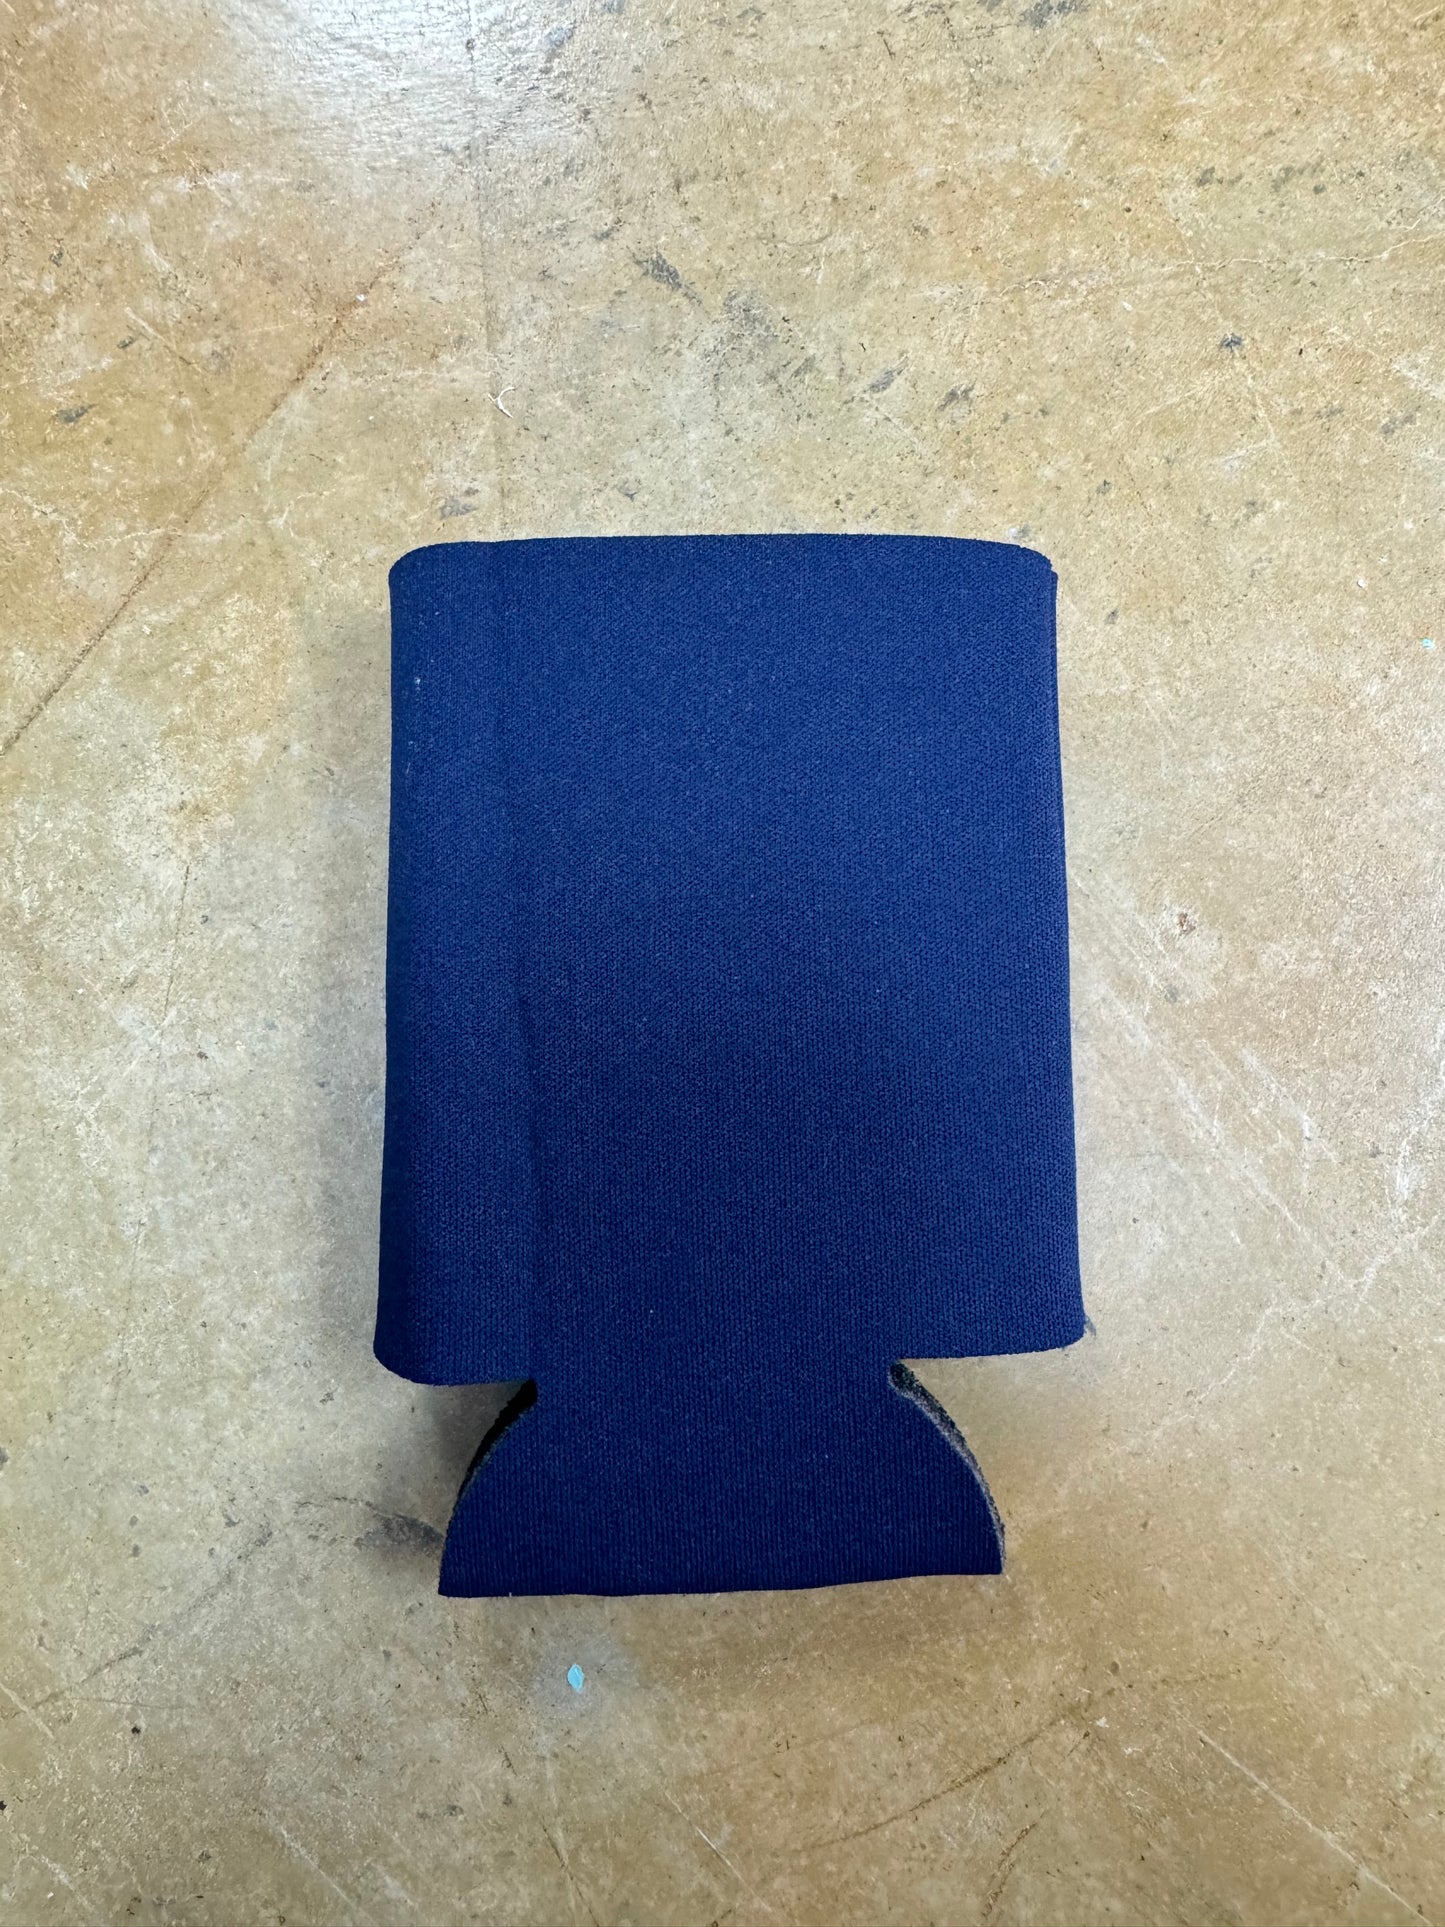 Blank Koozies Available In-Store – Customize Your Own!